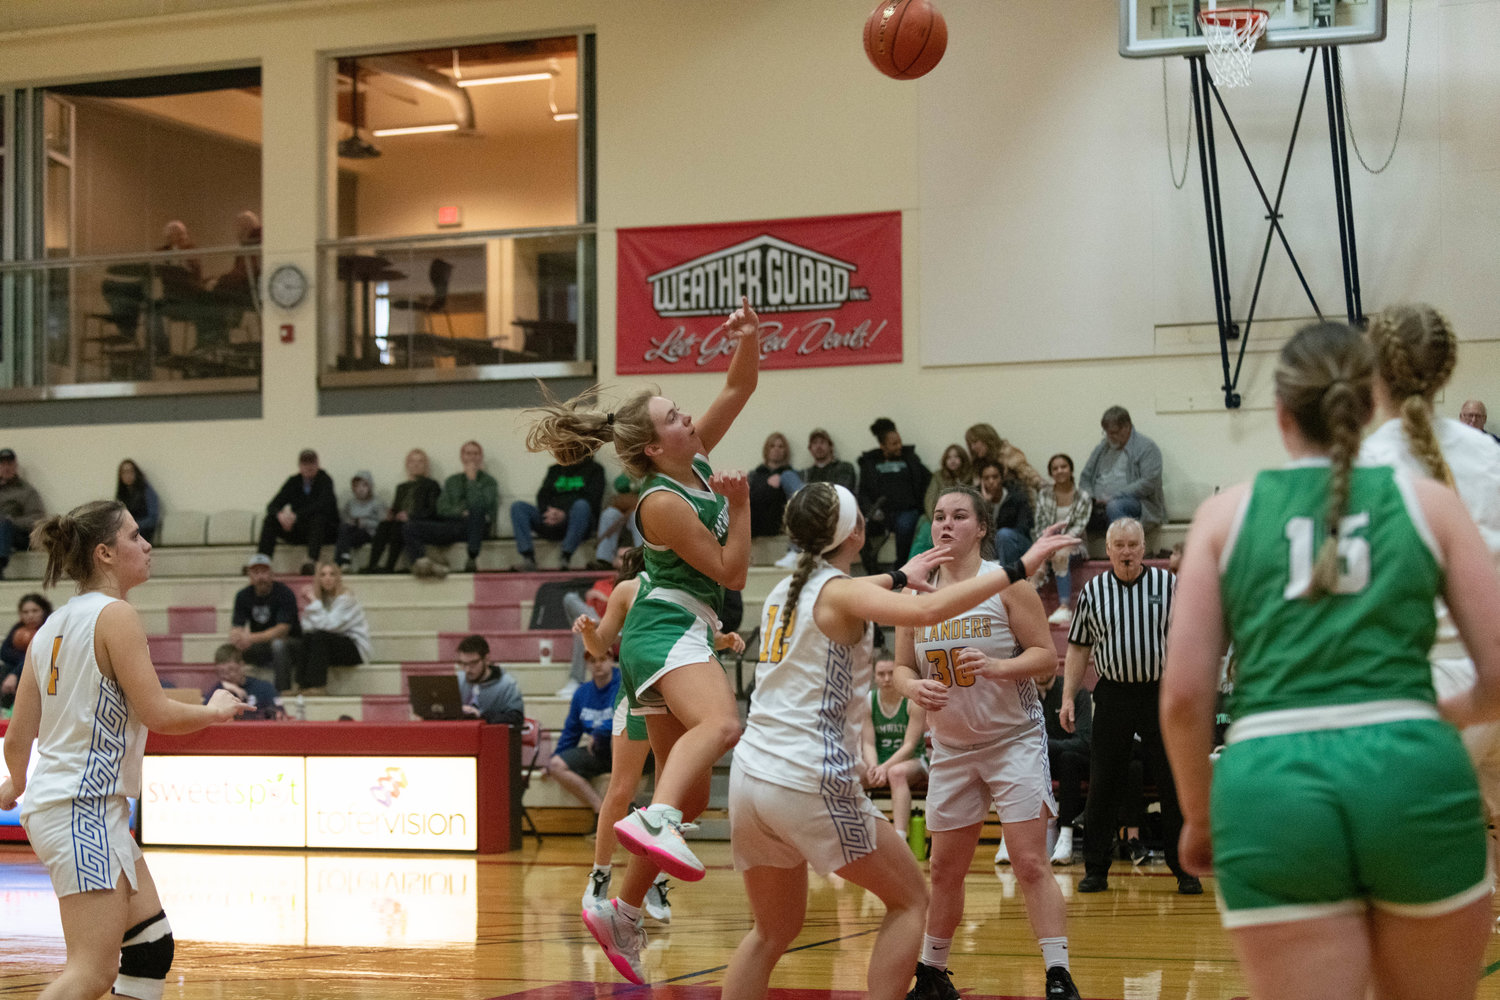 Rhylee Beebe throws up a shot on the move during the second half of Tumwater's 39-25 win over Kelso on Jan. 16 at the LCC MLK Day Classic in Longview.